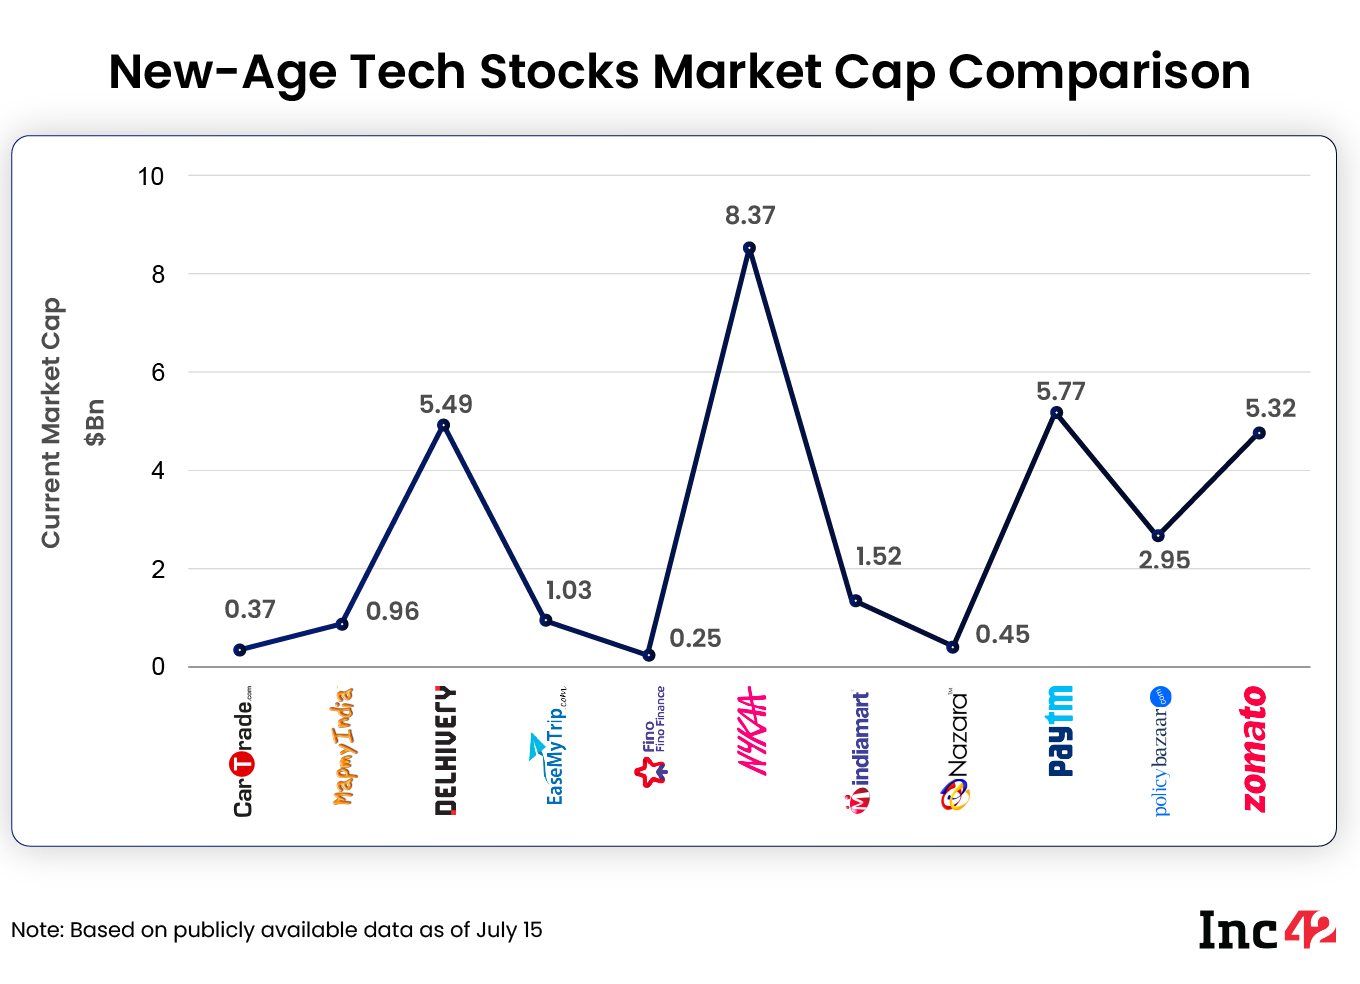 The 11 new-age tech stocks ended the week with a total market cap of around $32.48 Bn.